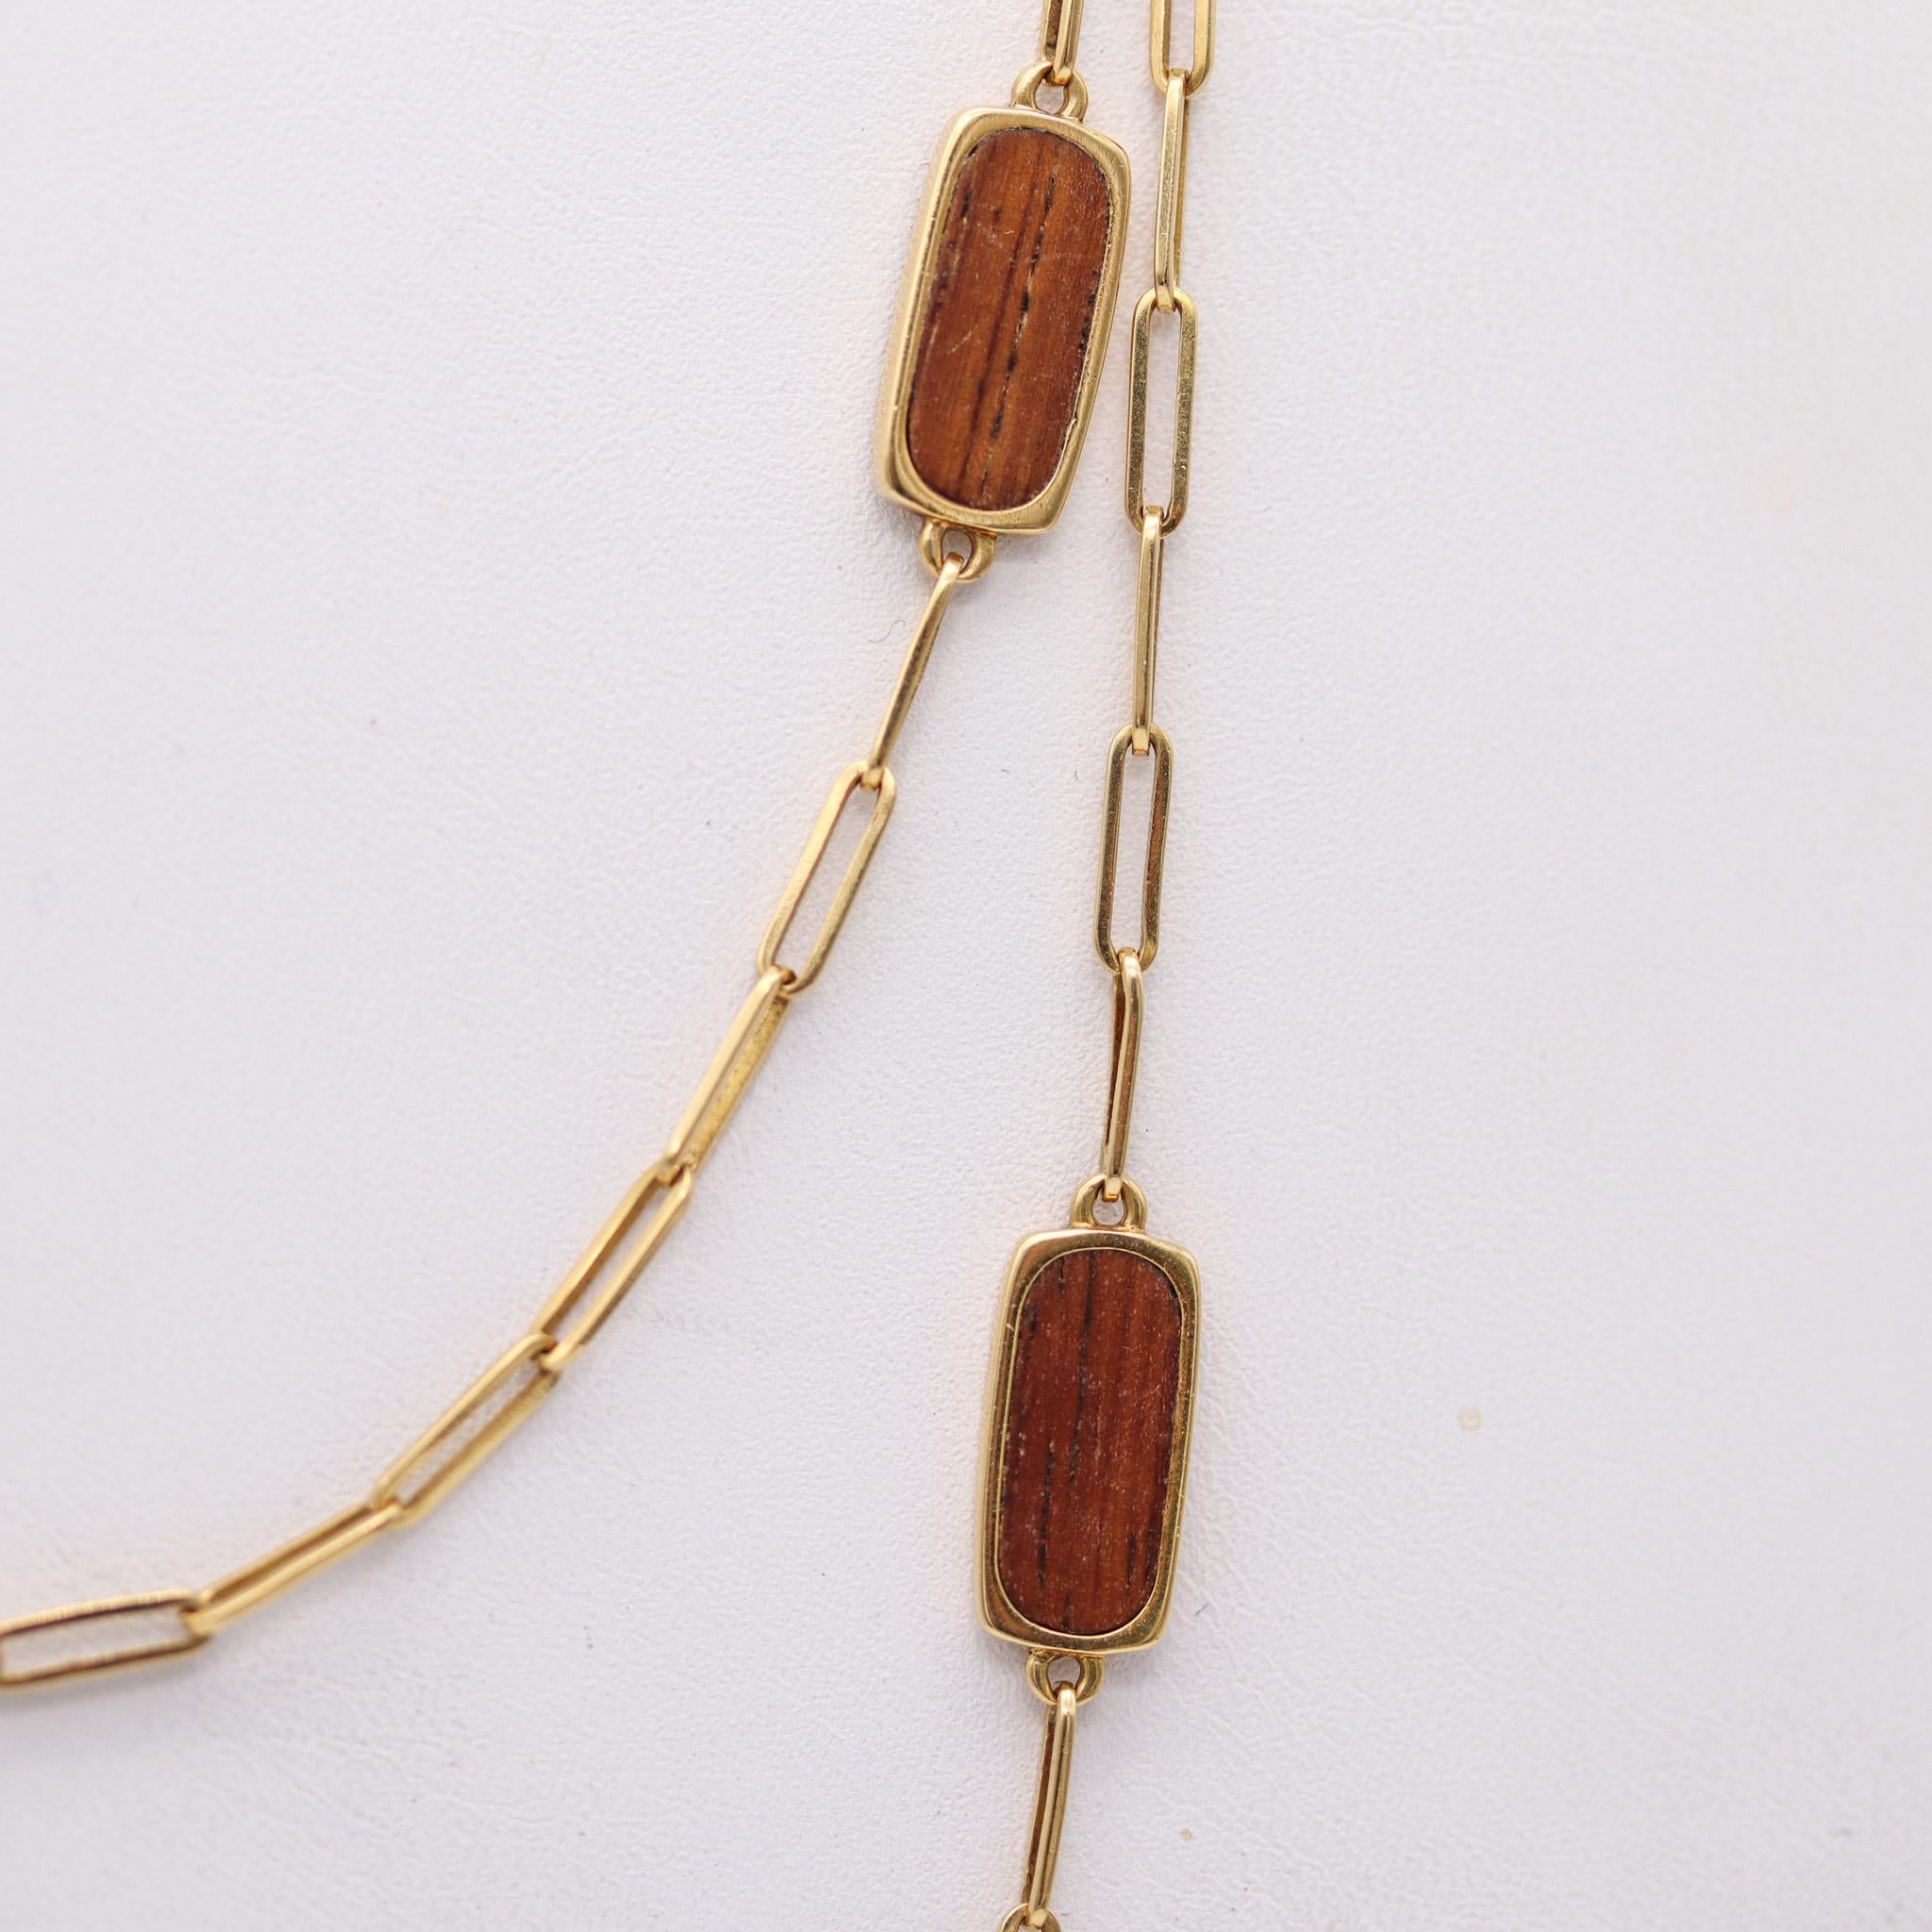 Wood sautoir necklace designed by Jean Dinh Van.

This is a very rare and sophisticated design, created in Paris France by the artist and jewelry designer Jean Dinh Van, back in the 1970's. This long necklace sautoir-type has been crafted in solid